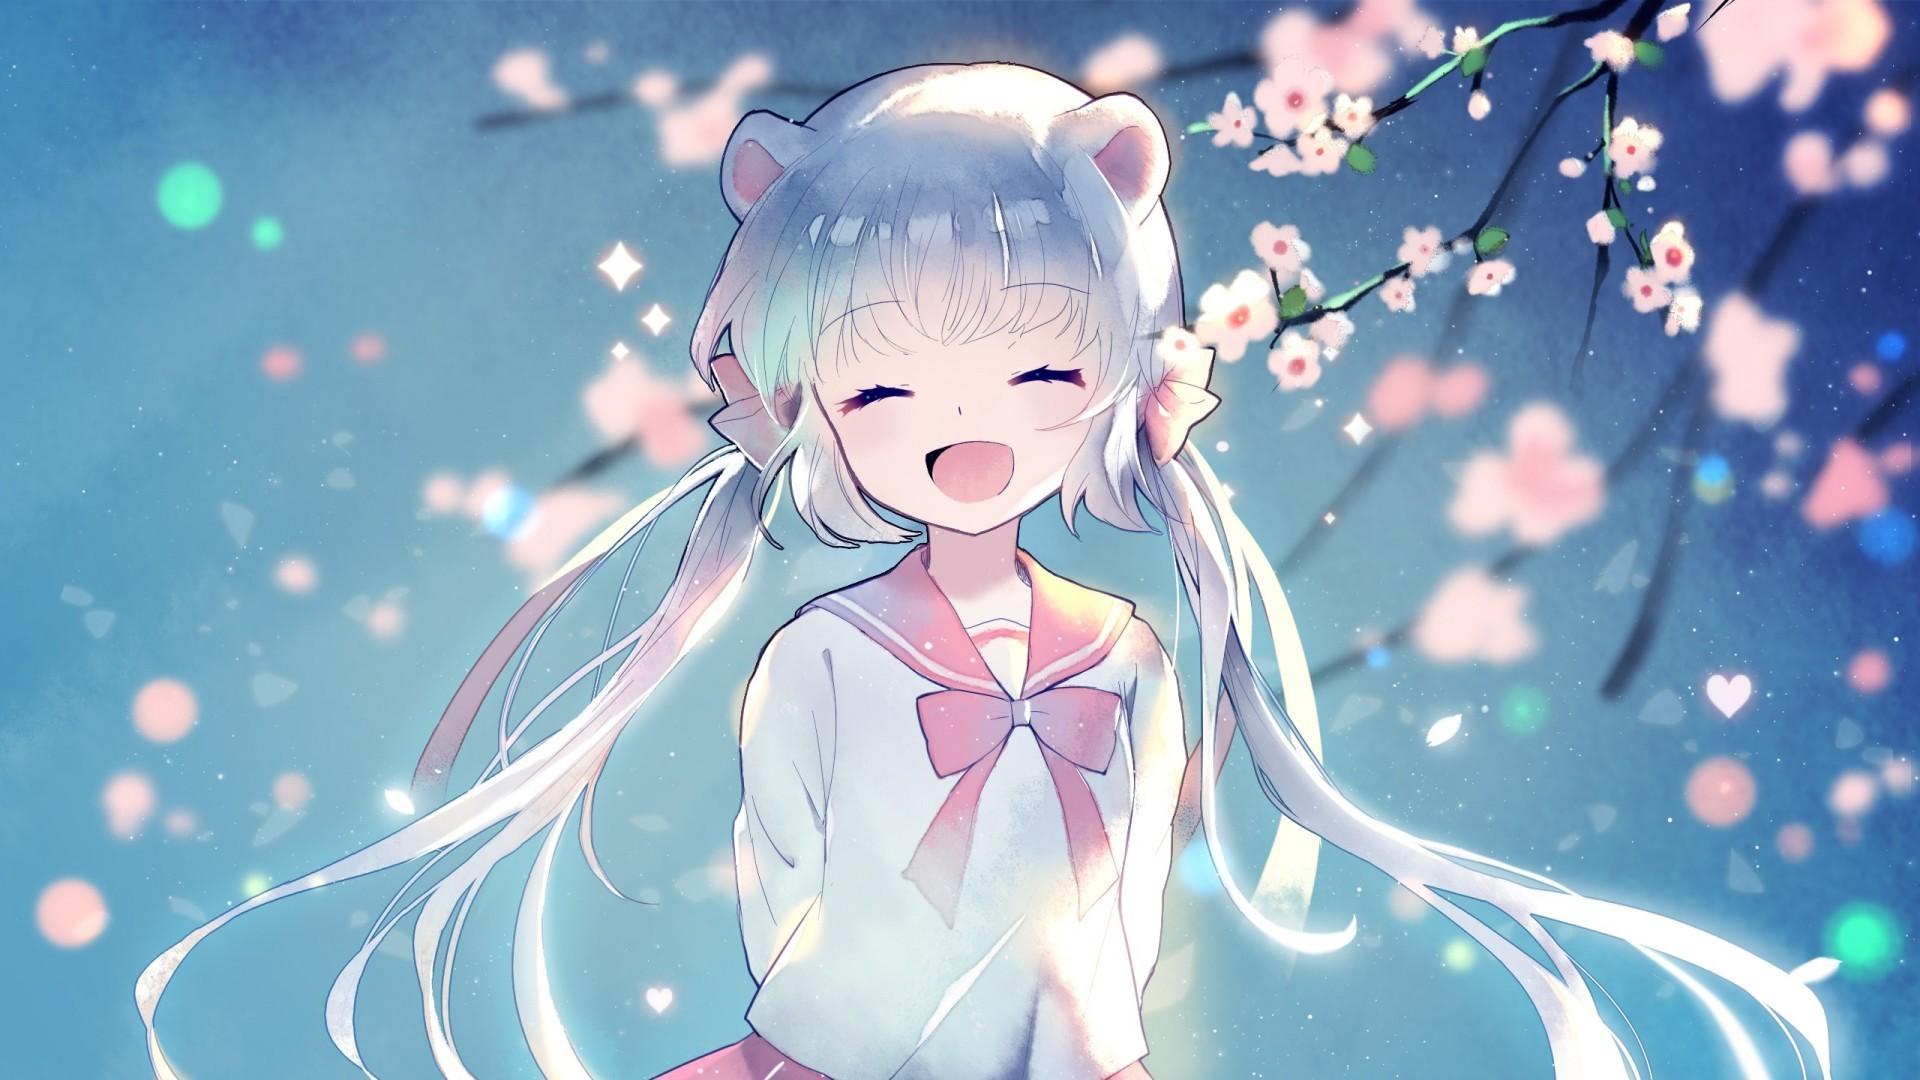 Download Happy Face Anime Girl Wallpaper | Wallpapers.com